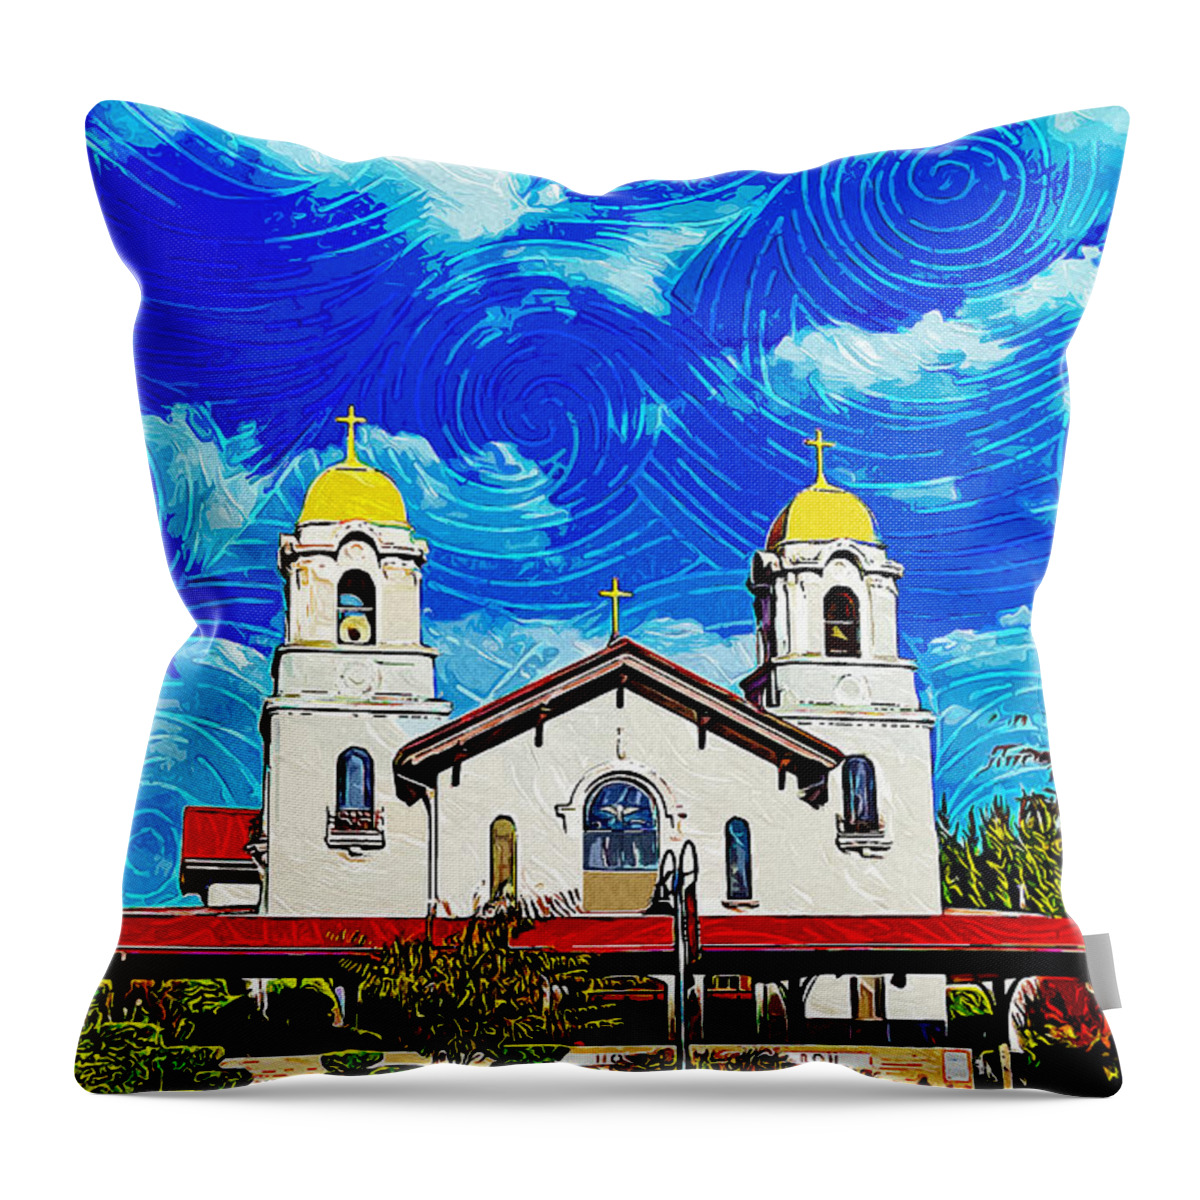 Holy Spirit Church Throw Pillow featuring the digital art Holy Spirit Church in Fremont, California - impressionist painting by Nicko Prints